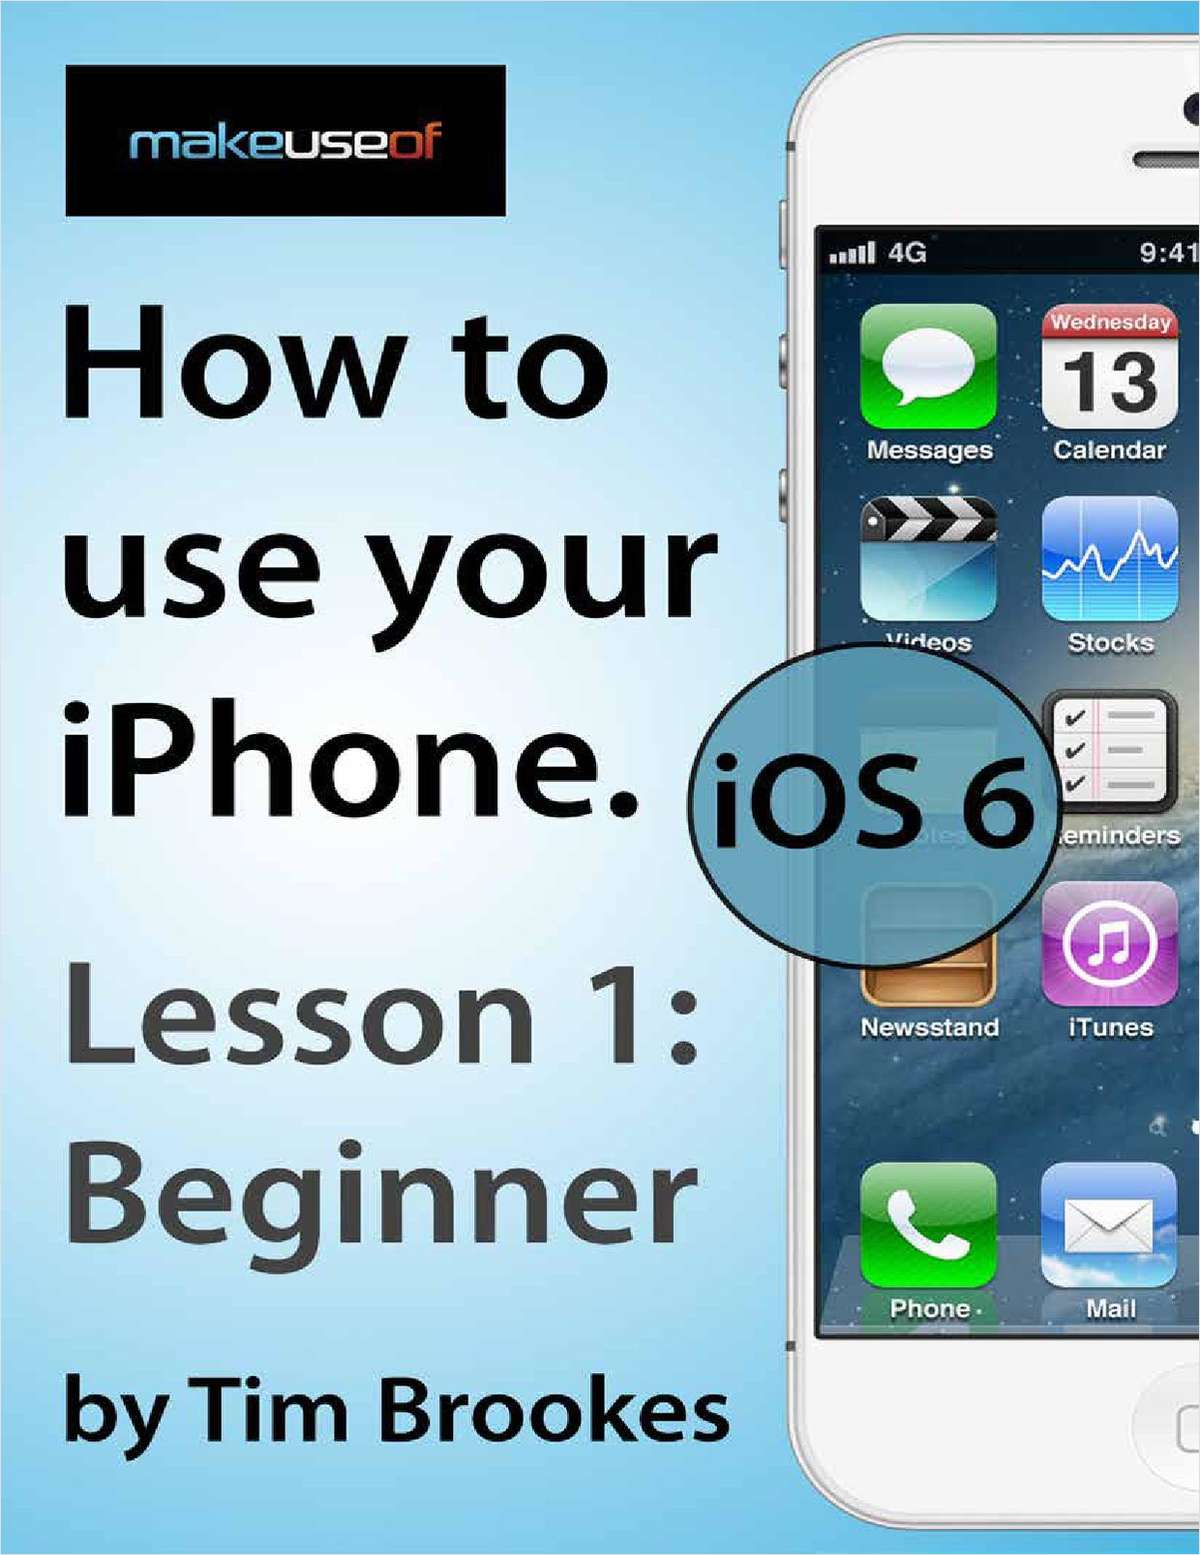 How To Use Your iPhone iOS6: Lesson 1 Beginner